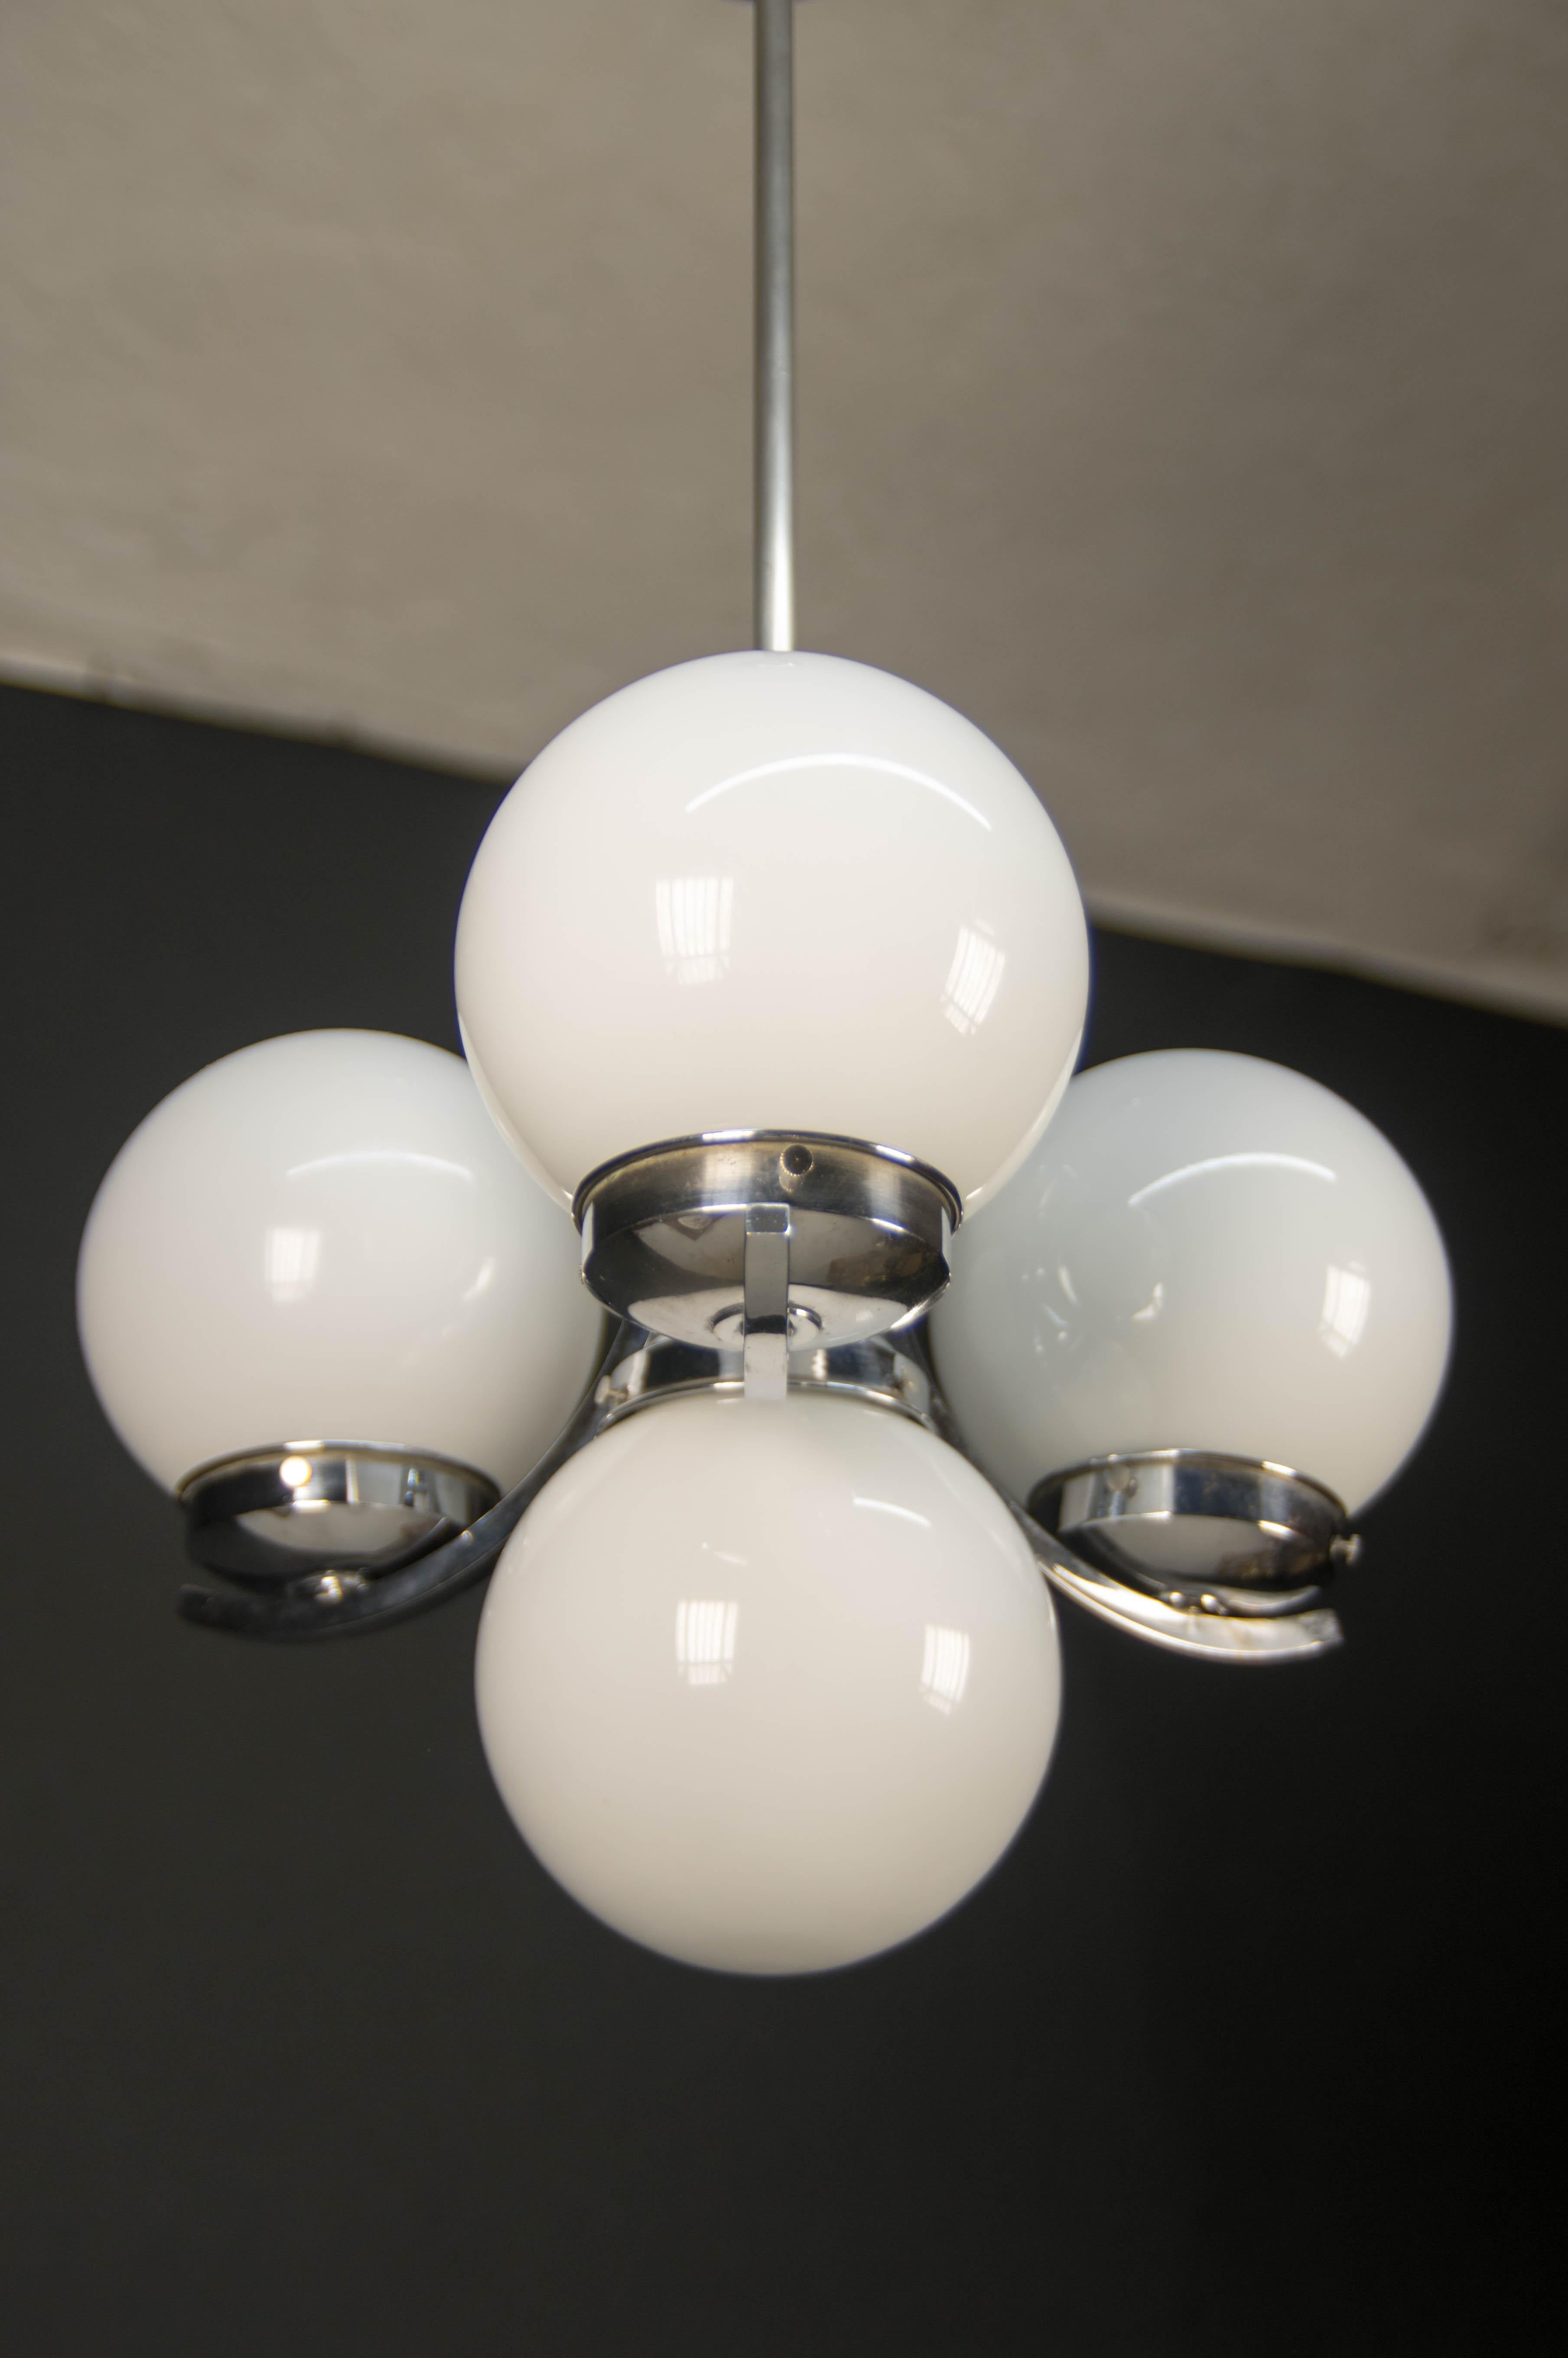 Rewired - two separate circuits: 1+3 E25-E27 bulbs, 4x40W
US wiring compatible
Glass in perfect condition
Diameter of the globe 15cm
Chrome with minor age patina - polished.